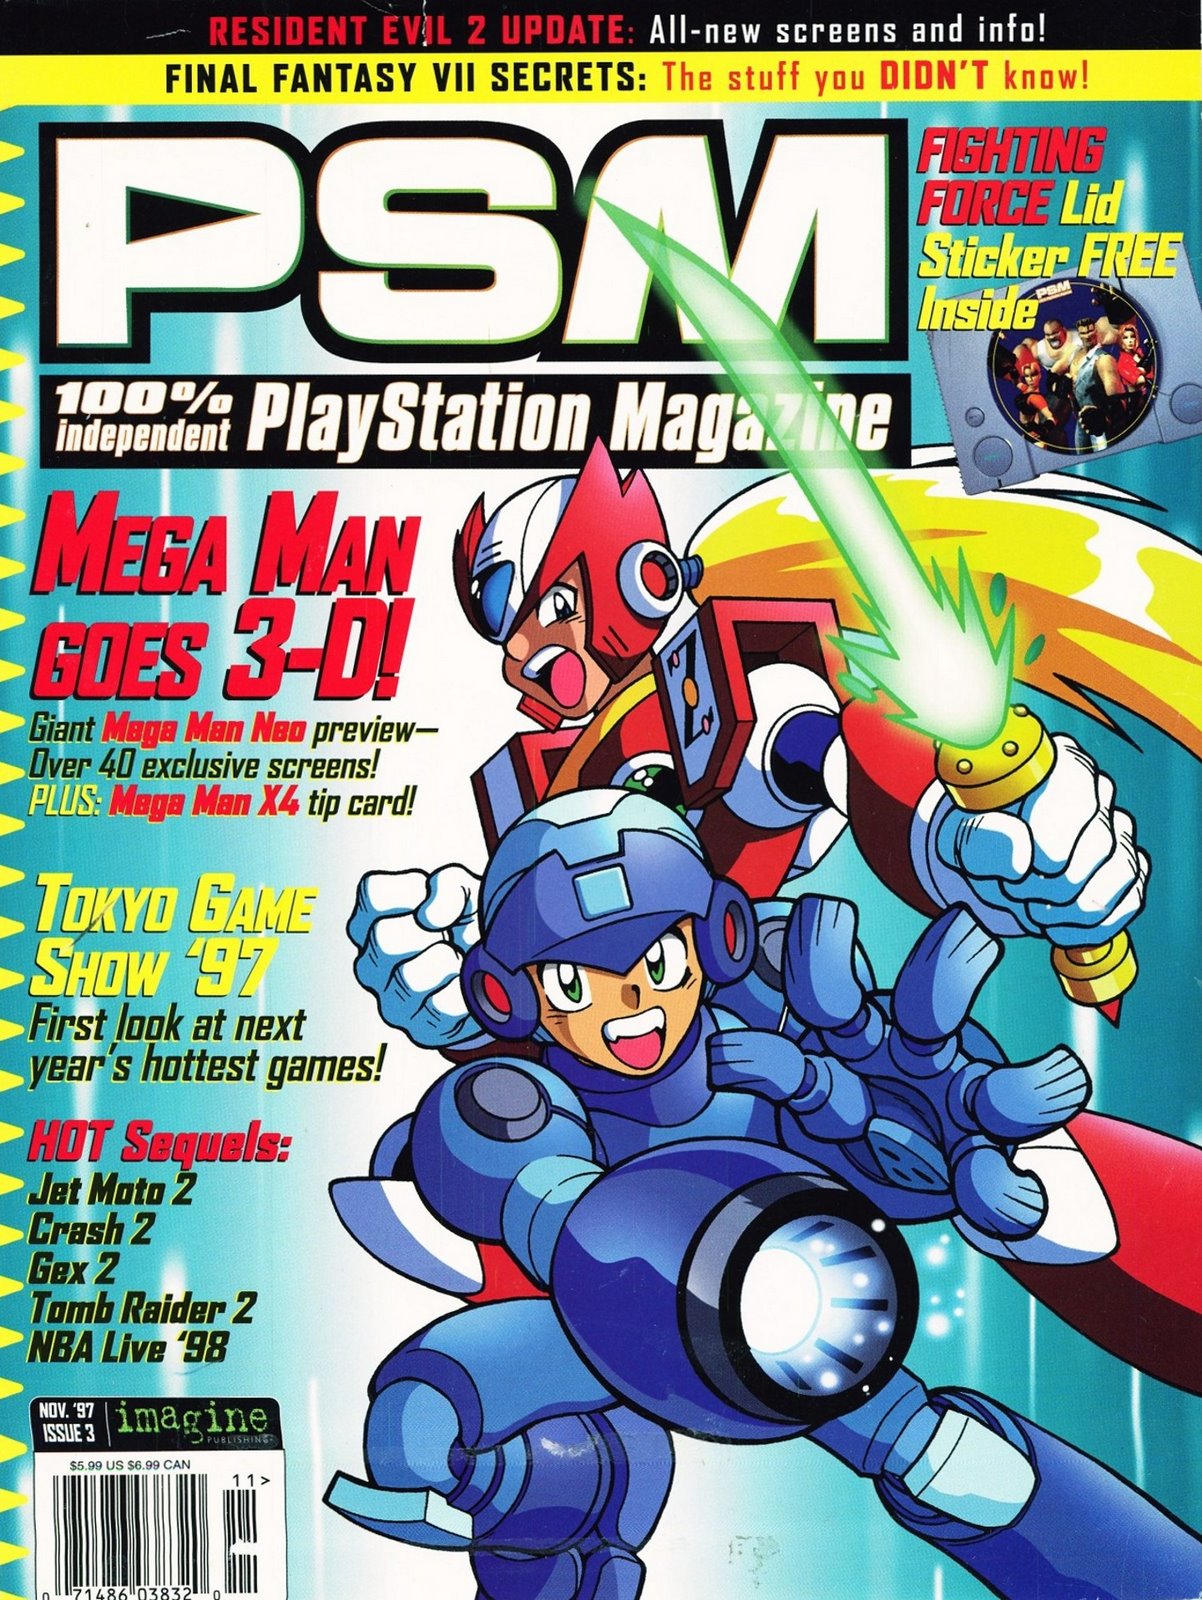 2boys adam_warren alana_mckendricks android arm_cannon barcode clenched_hand collaboration copyright_name cover energy_sword fighting_force game_console green_eyes hawk_manson helmet highres holding holding_sword holding_weapon mace_daniels magazine_cover male_focus mega_man_(character) mega_man_(series) mega_man_zero multiple_boys official_art open_hand open_mouth pat_duke playstation_1 psm scan sword weapon zero_(mega_man)